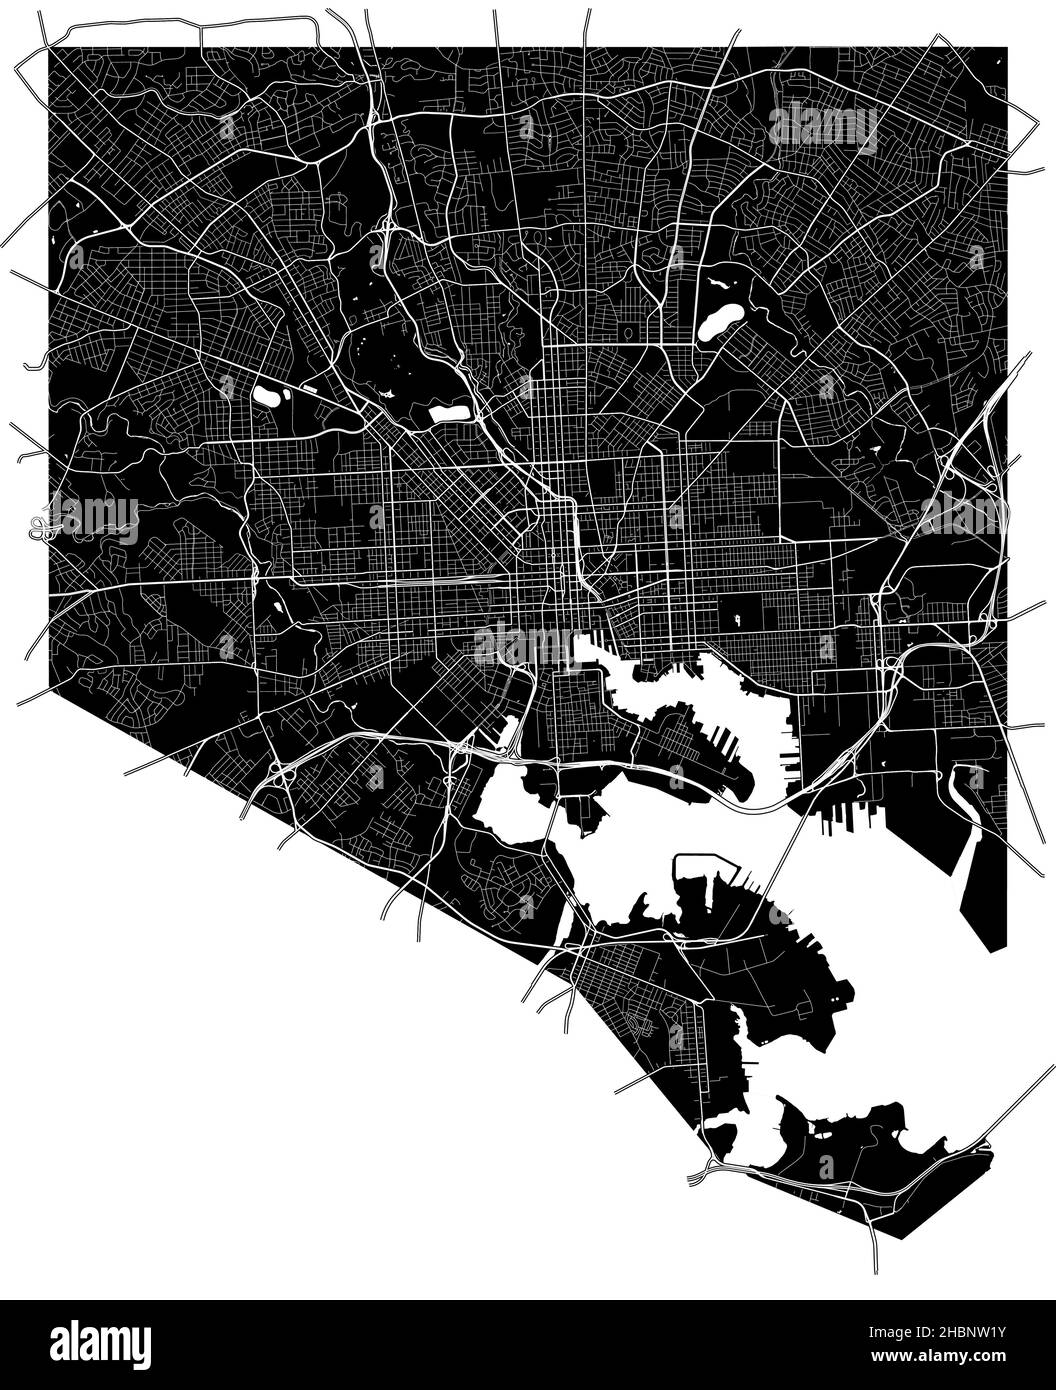 Baltimore, Maryland, United States, high resolution vector map with city boundaries, and editable paths. The city map was drawn with white areas and l Stock Vector